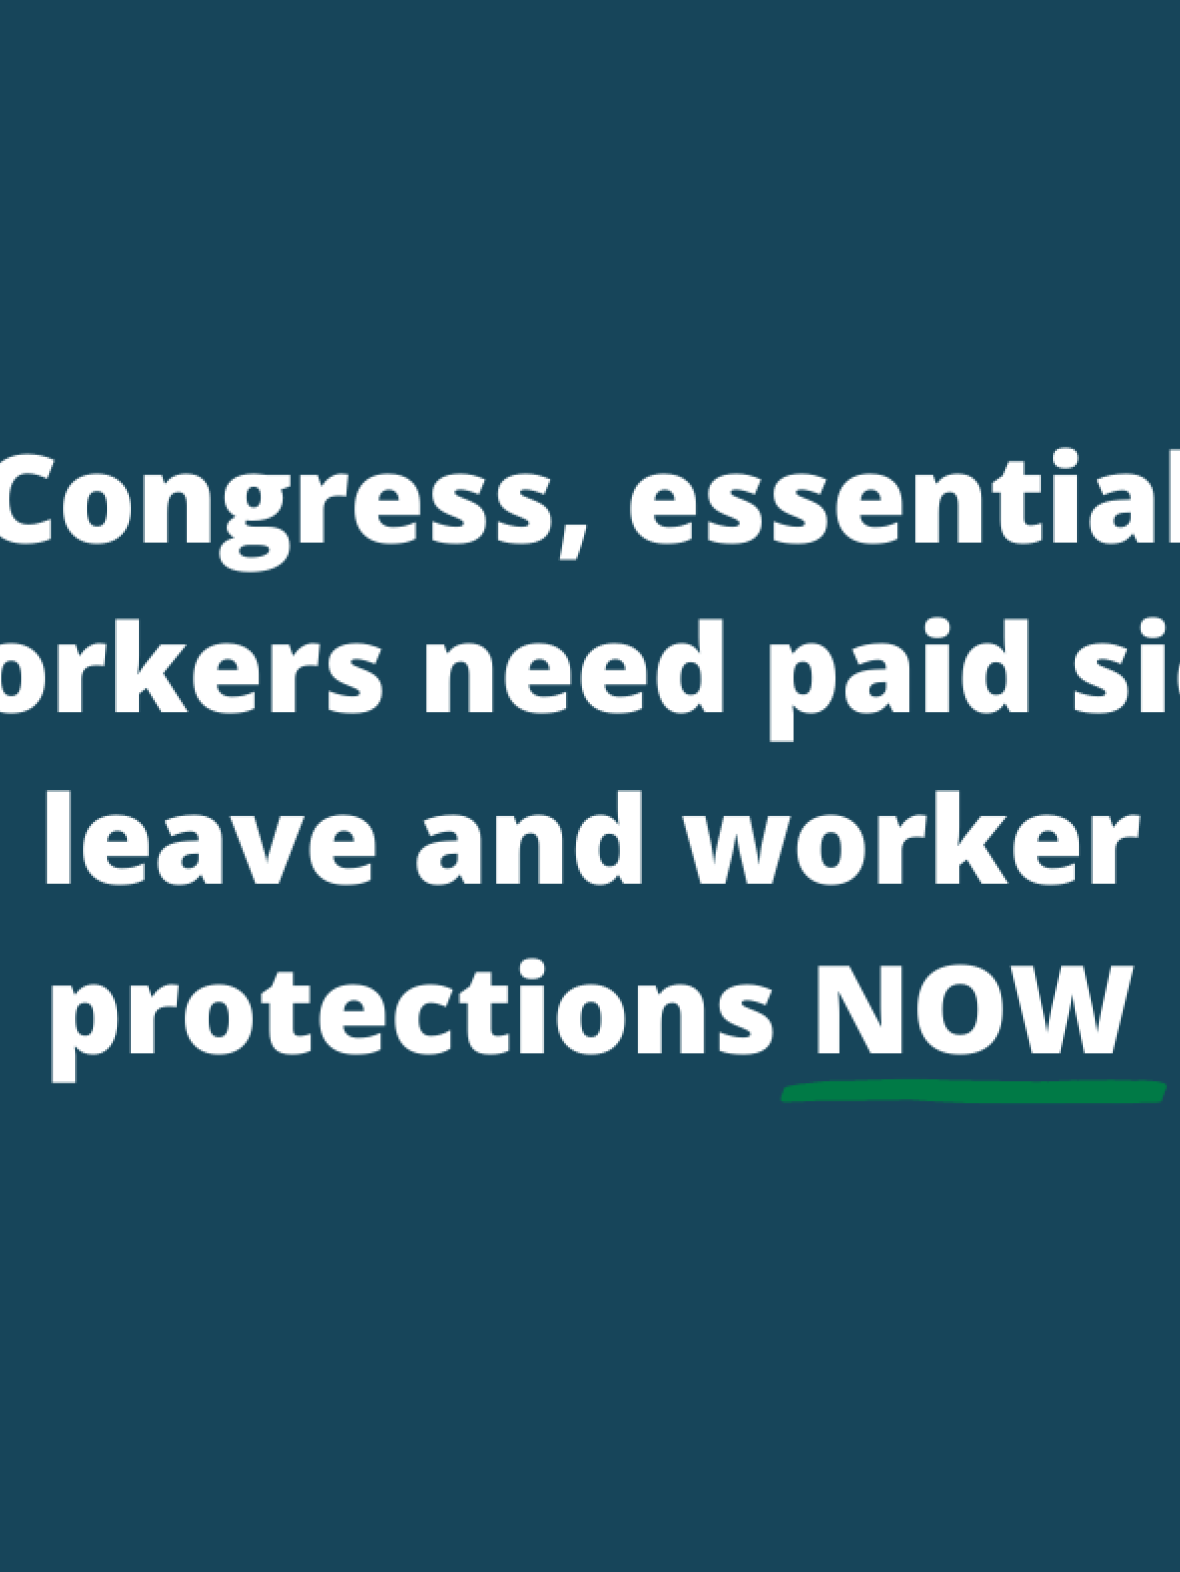 Support Paid Sick Leave and Worker Protections